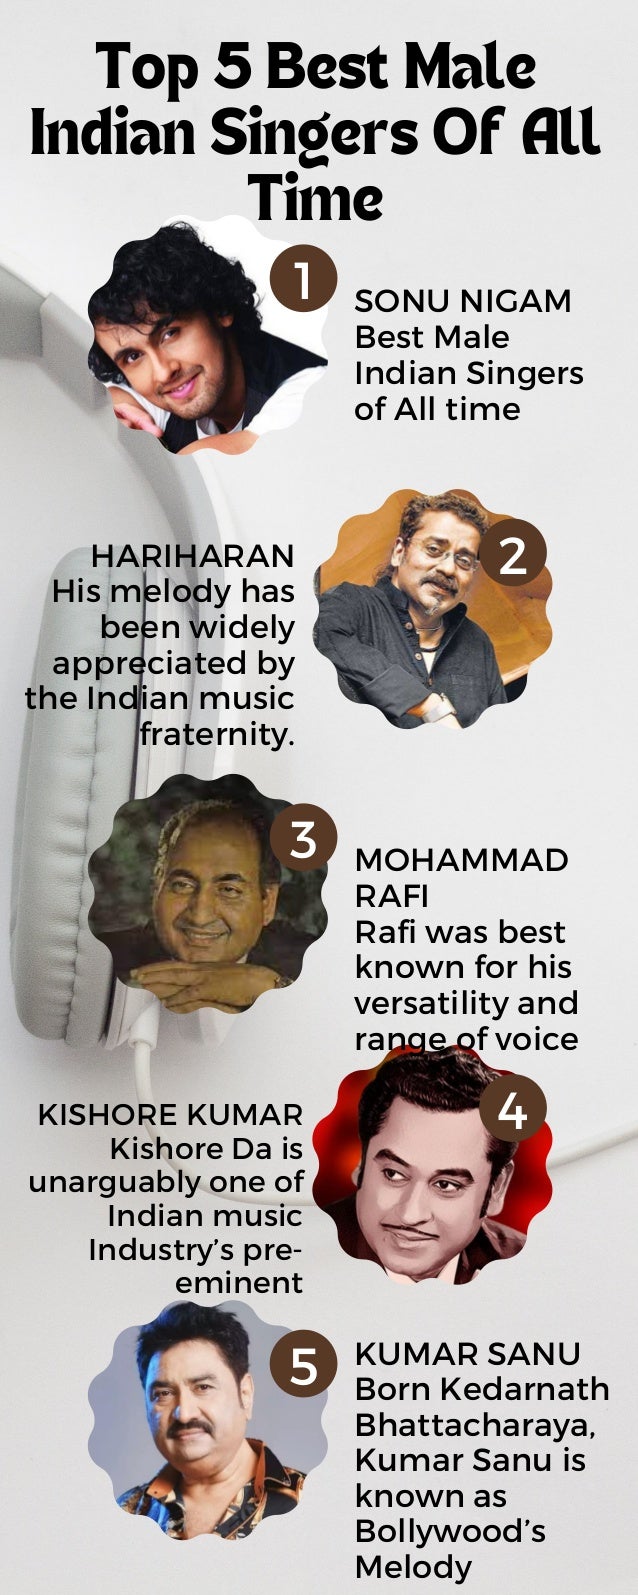 Top 5 Best Male
Indian Singers Of All
Time
SONU NIGAM
Best Male
Indian Singers
of All time
1
HARIHARAN
His melody has
been widely
appreciated by
the Indian music
fraternity.
2
MOHAMMAD
RAFI
Rafi was best
known for his
versatility and
range of voice
3
KISHORE KUMAR
Kishore Da is
unarguably one of
Indian music
Industry’s pre-
eminent
4
KUMAR SANU
Born Kedarnath
Bhattacharaya,
Kumar Sanu is
known as
Bollywood’s
Melody
5
 